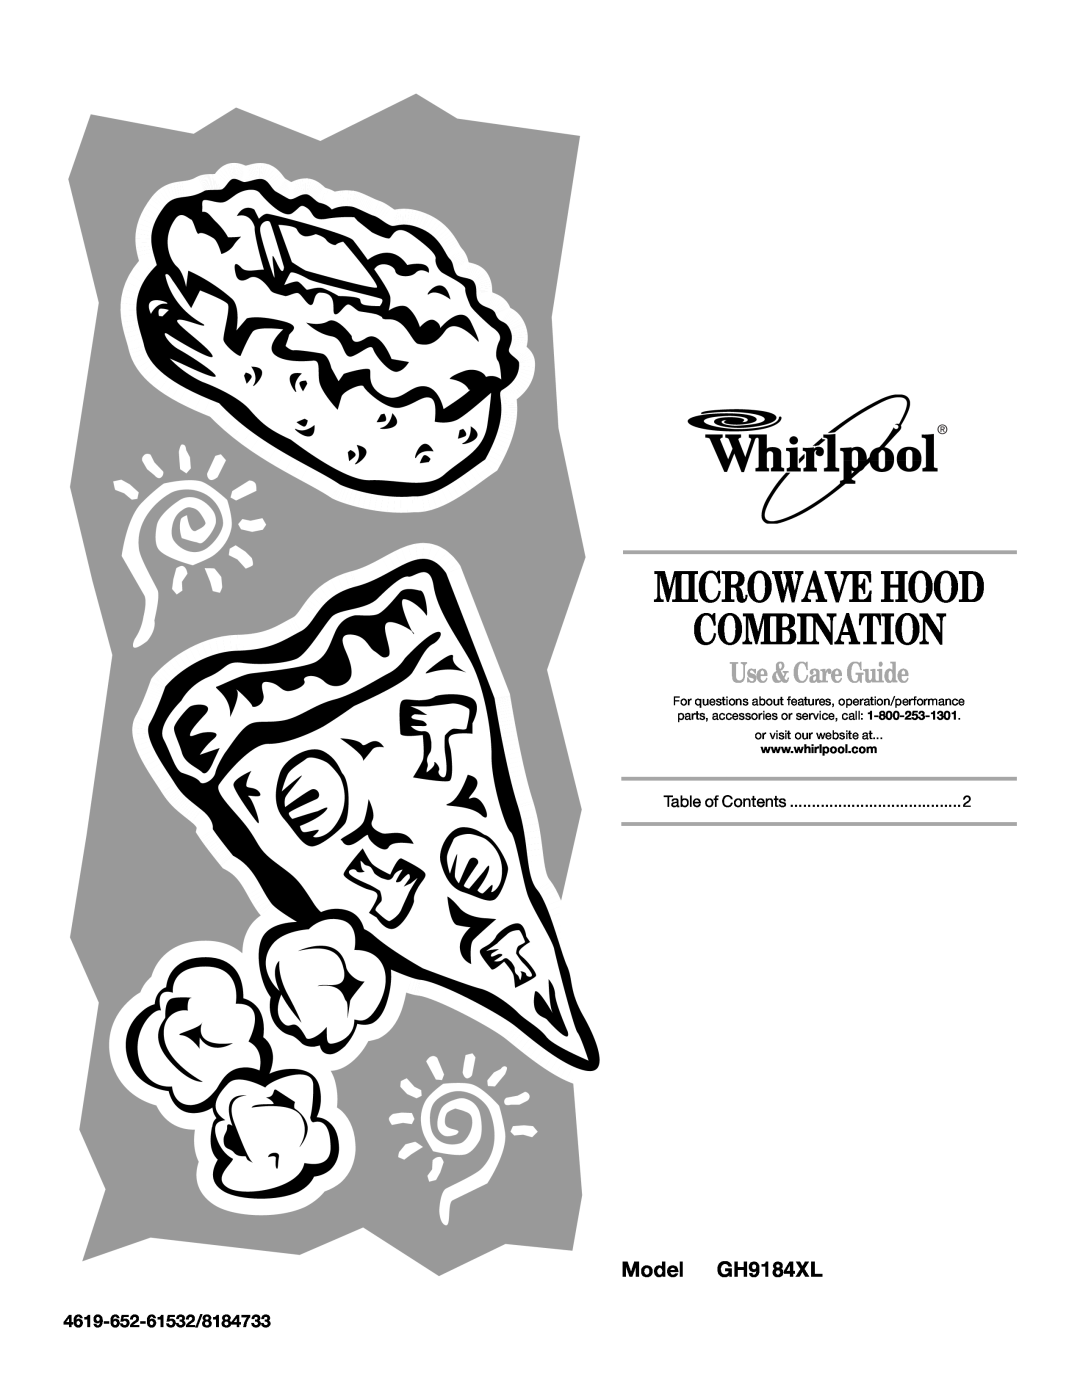 Whirlpool manual Microwave Hood Combination, Use & Care Guide, Model GH9184XL, or visit our website at 